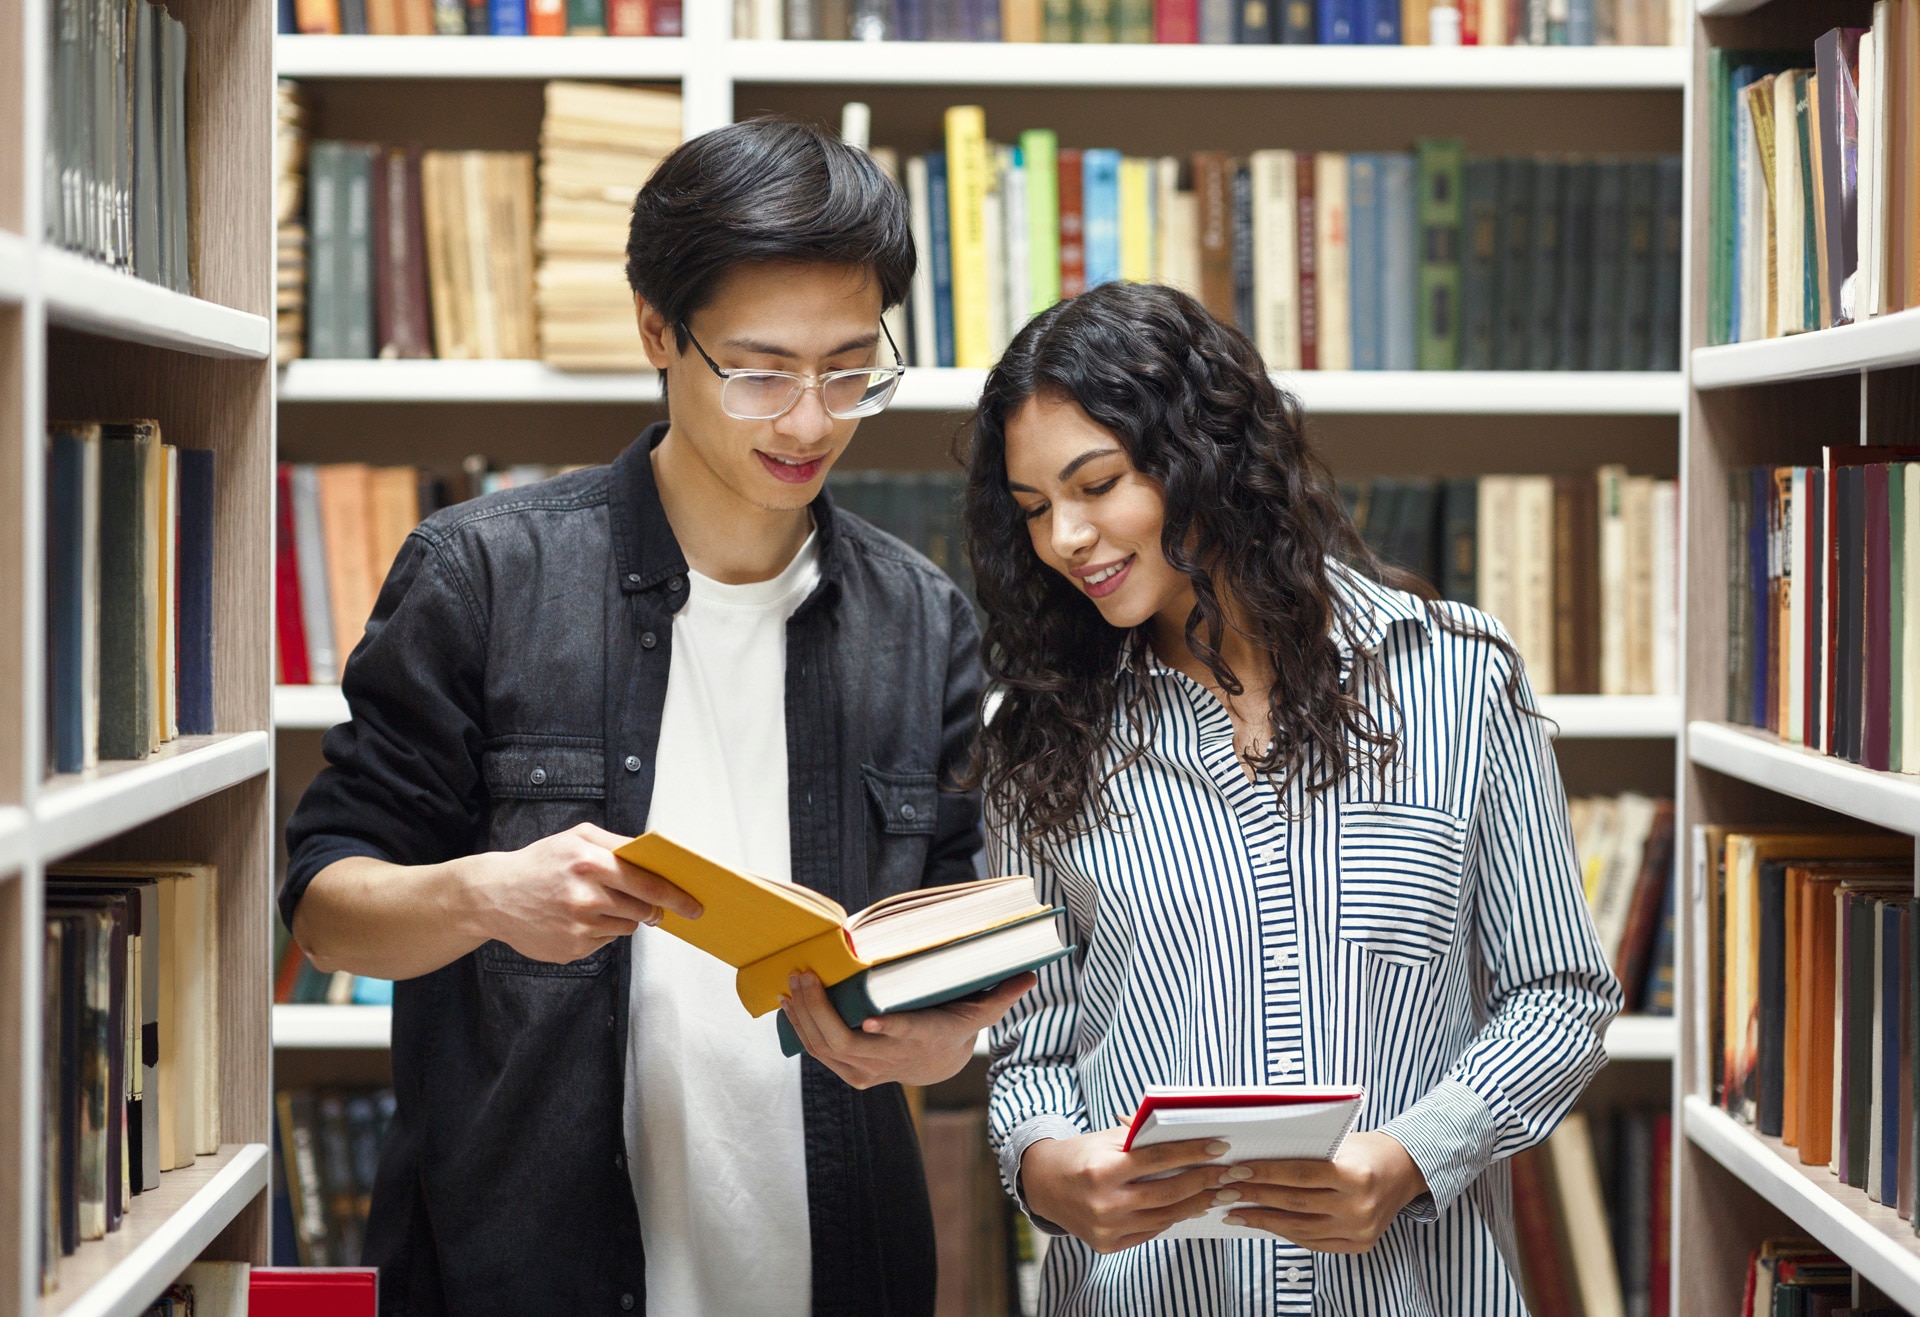 Student Exchange Program. Two multiracial students standing in university library.